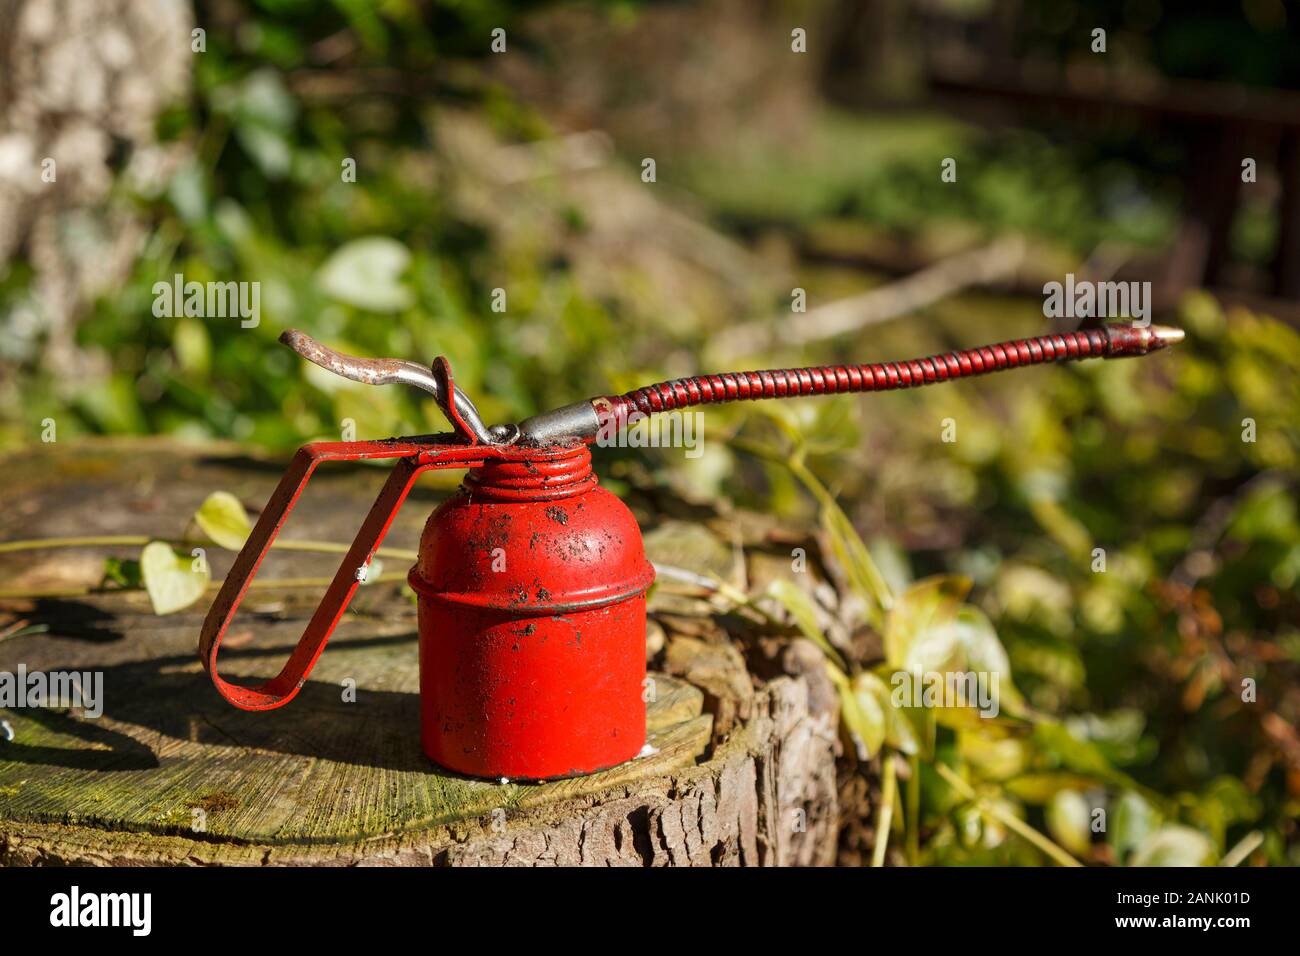 Old fashioned red oil can shot outside on a old tree stump, with green foliage in the background, on a sunny day. Stock Photo